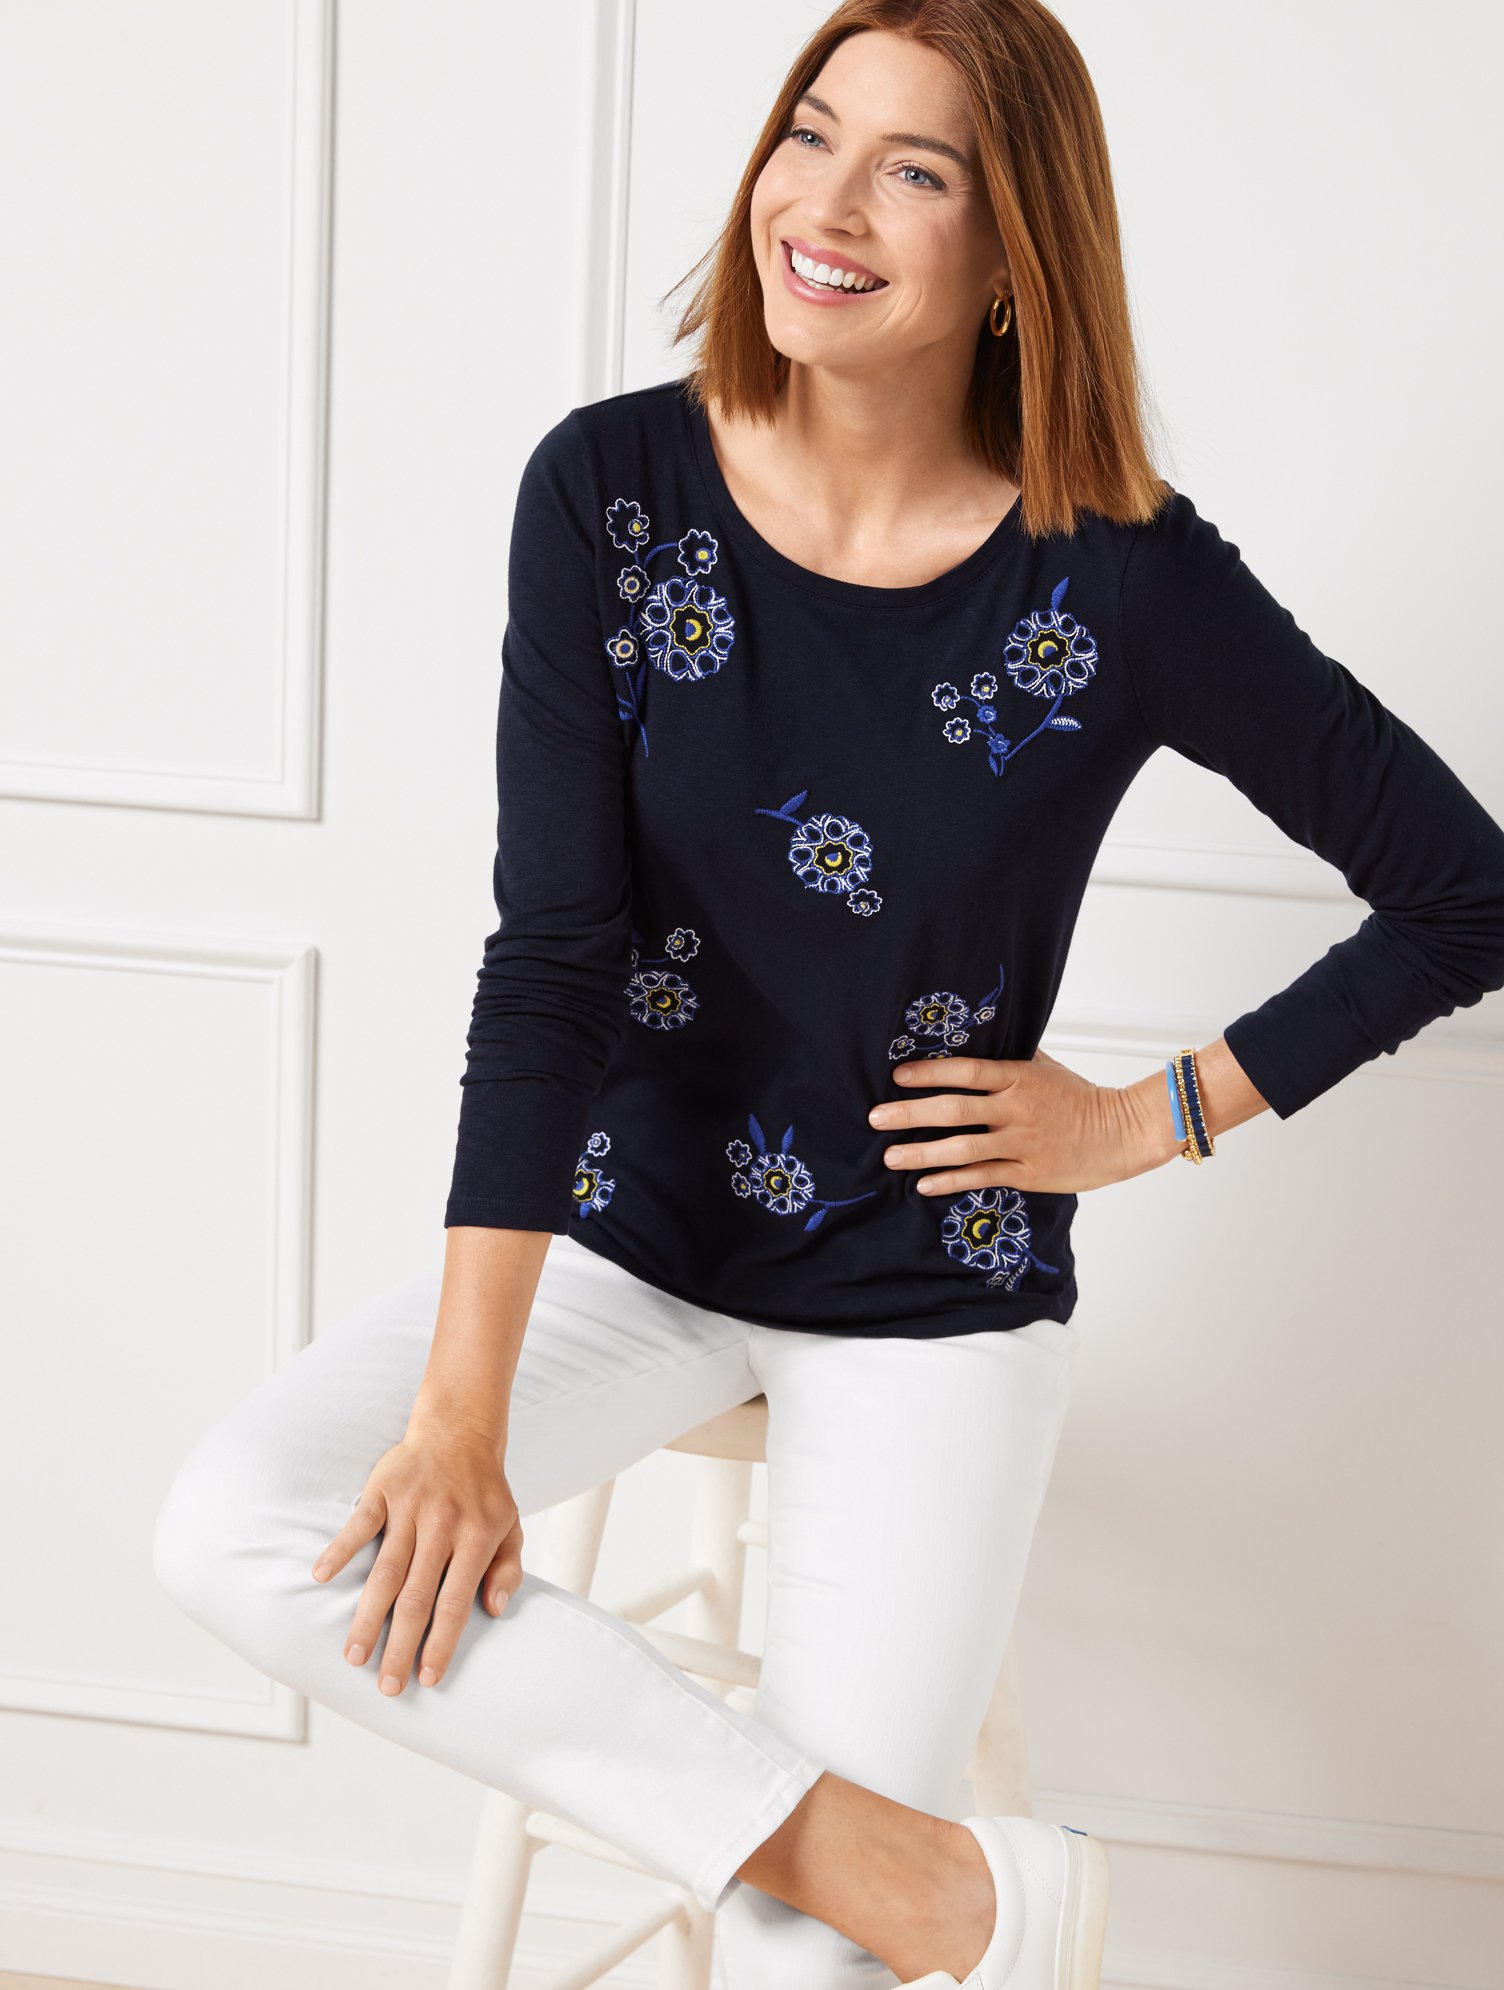 Talbots Embroidered Crewneck T-shirt - Floral - Blue - 3x